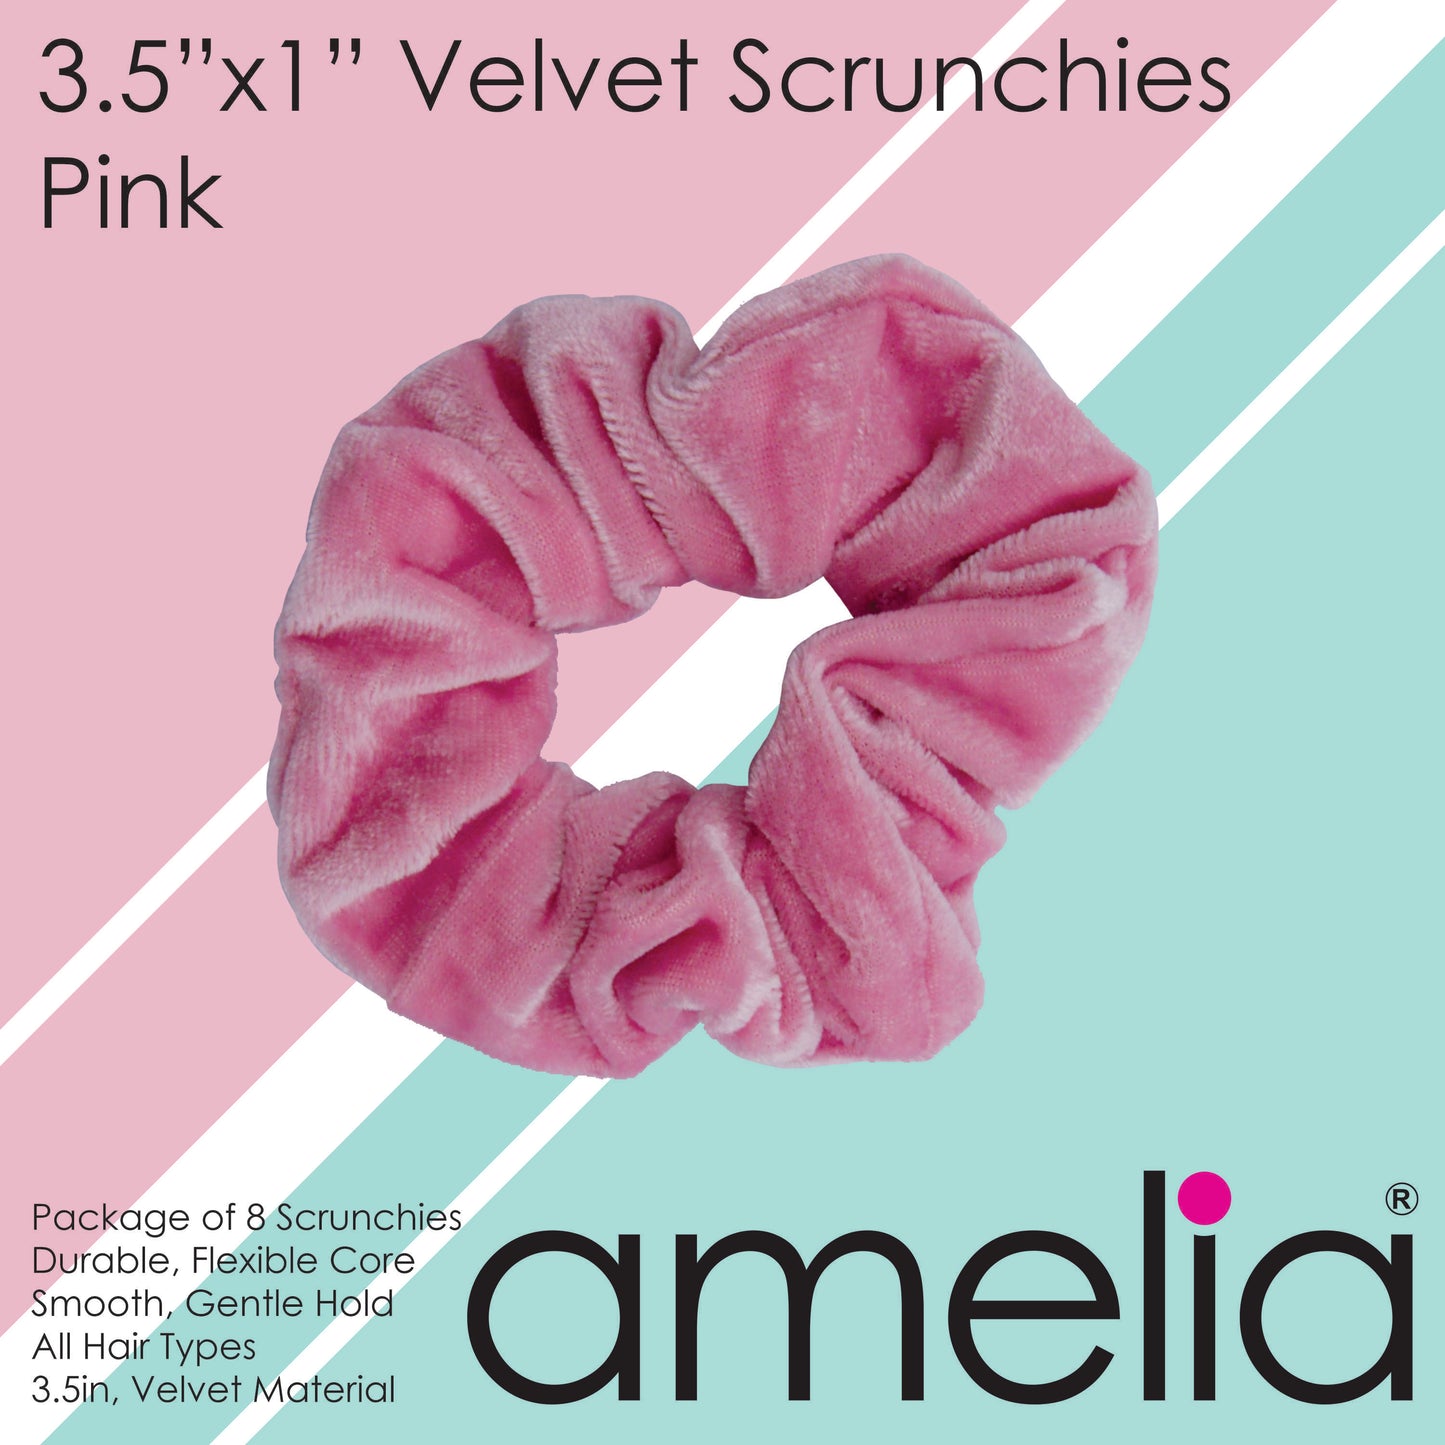 Amelia Beauty Products, Pink Velvet Velvet Scrunchies, 3.5in Diameter, Gentle on Hair, Strong Hold, No Snag, No Dents or Creases. 8 Pack